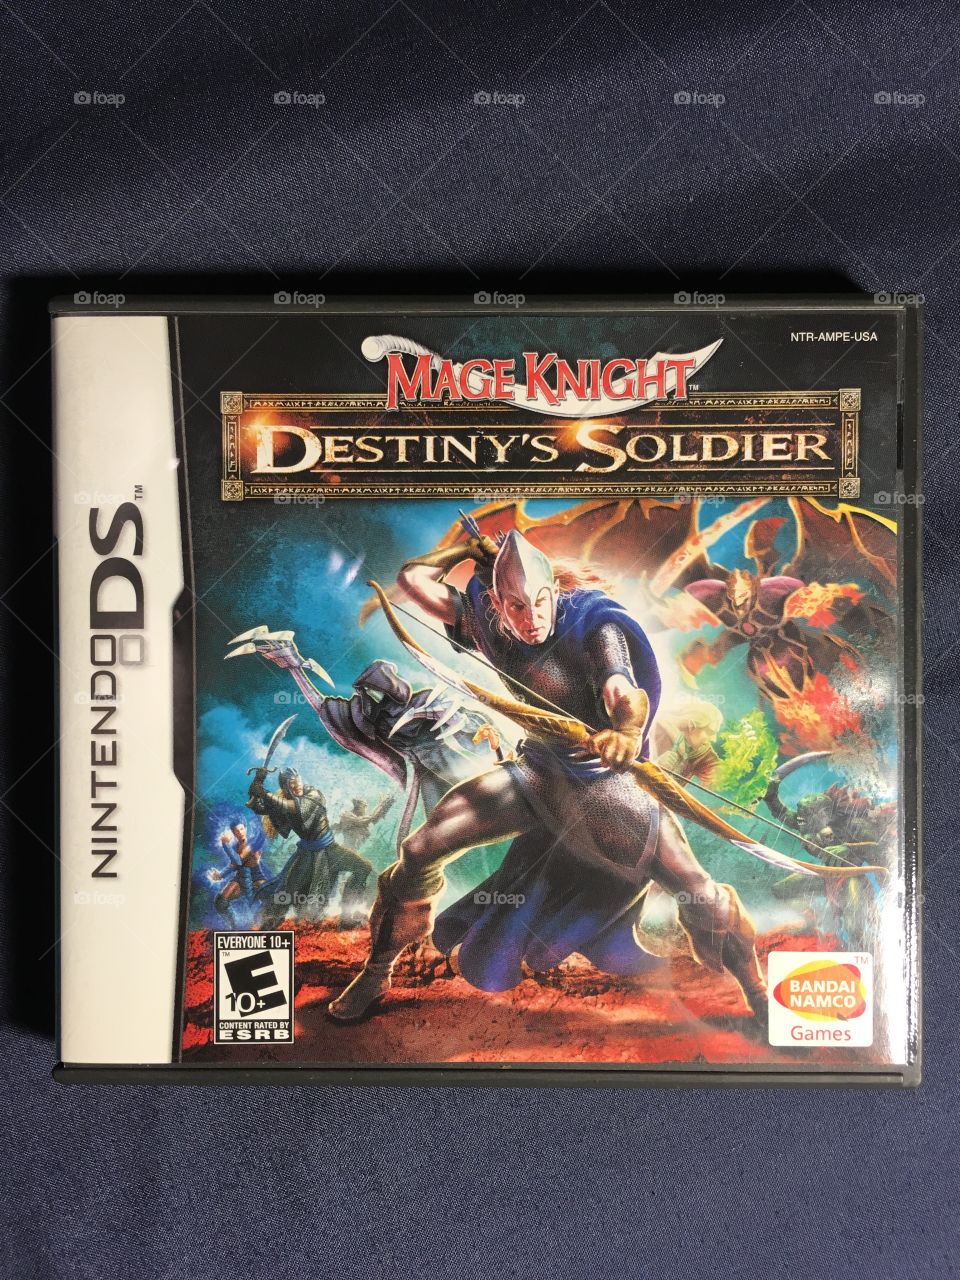 Mage Knight - Destiny's soldier for the Nintendo DS - released 2006